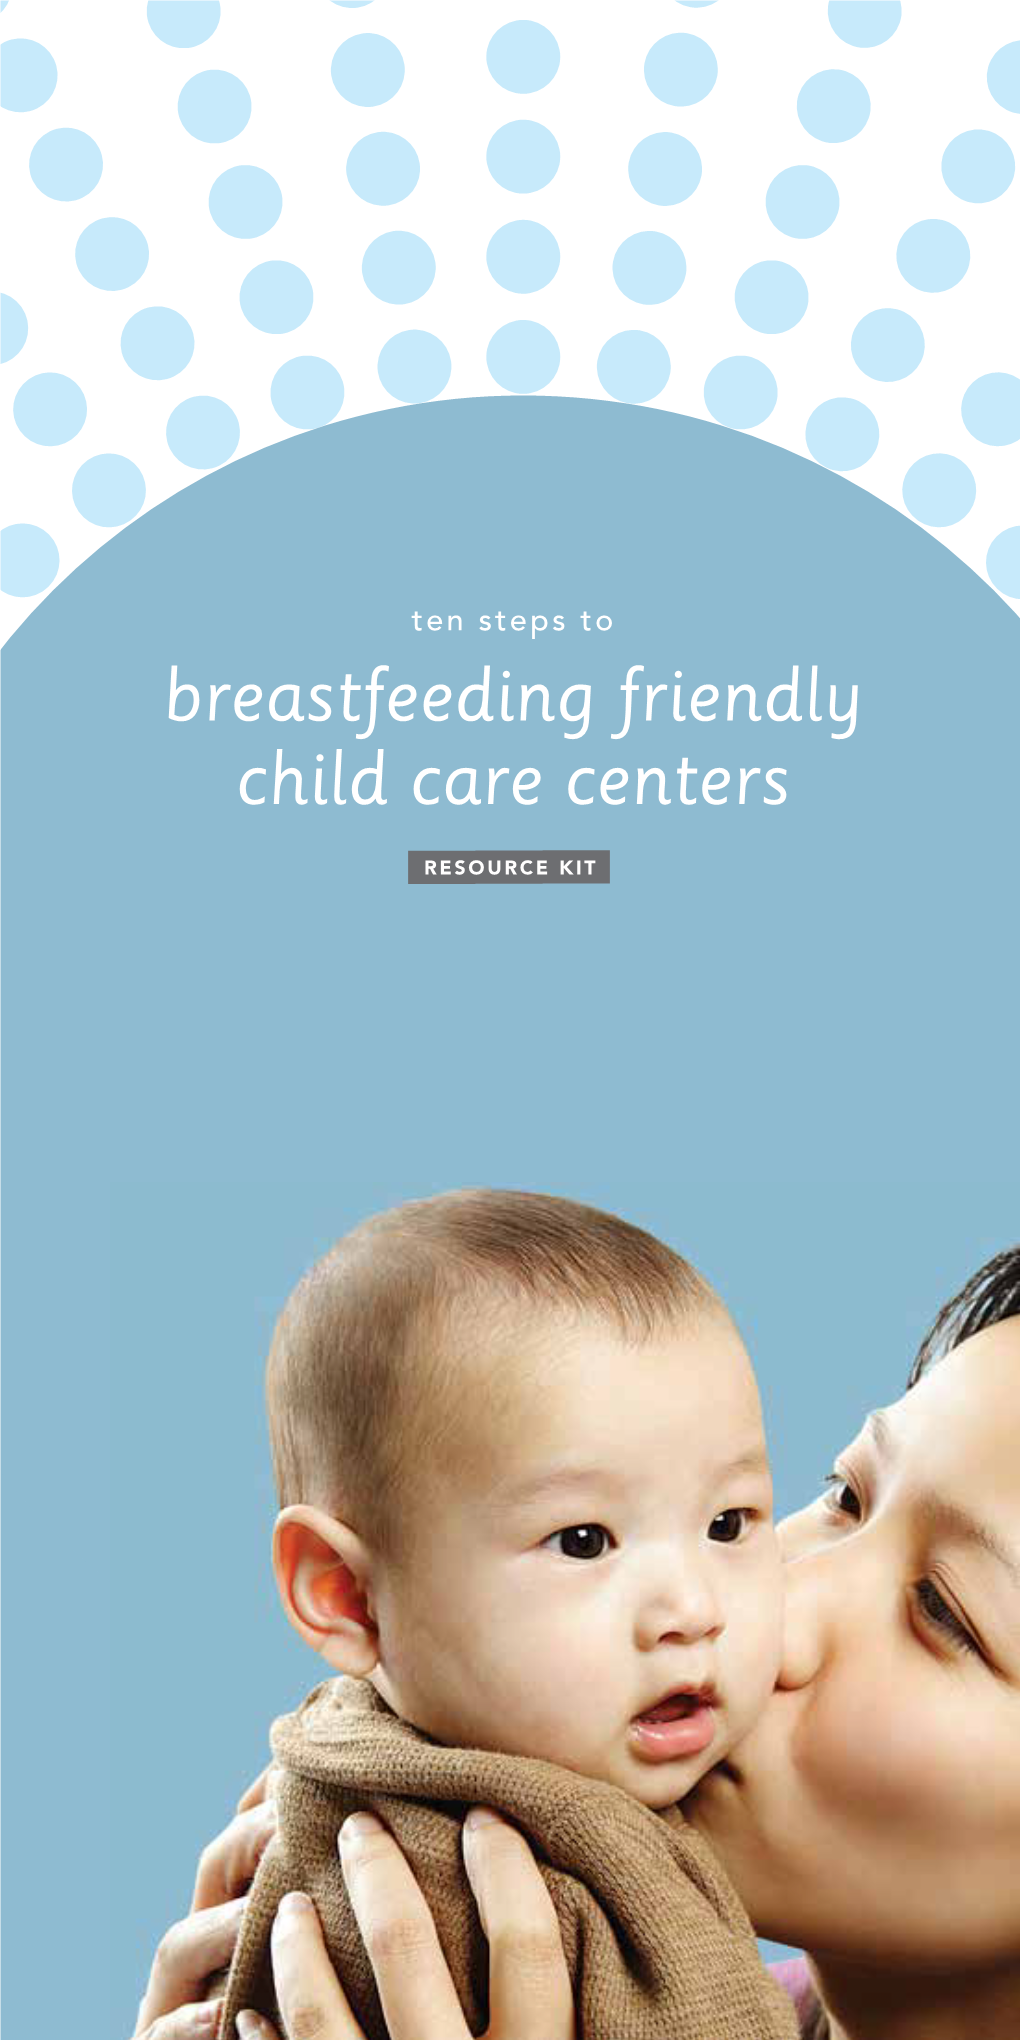 Ten Steps to Breastfeeding Friendly Child Care Centers